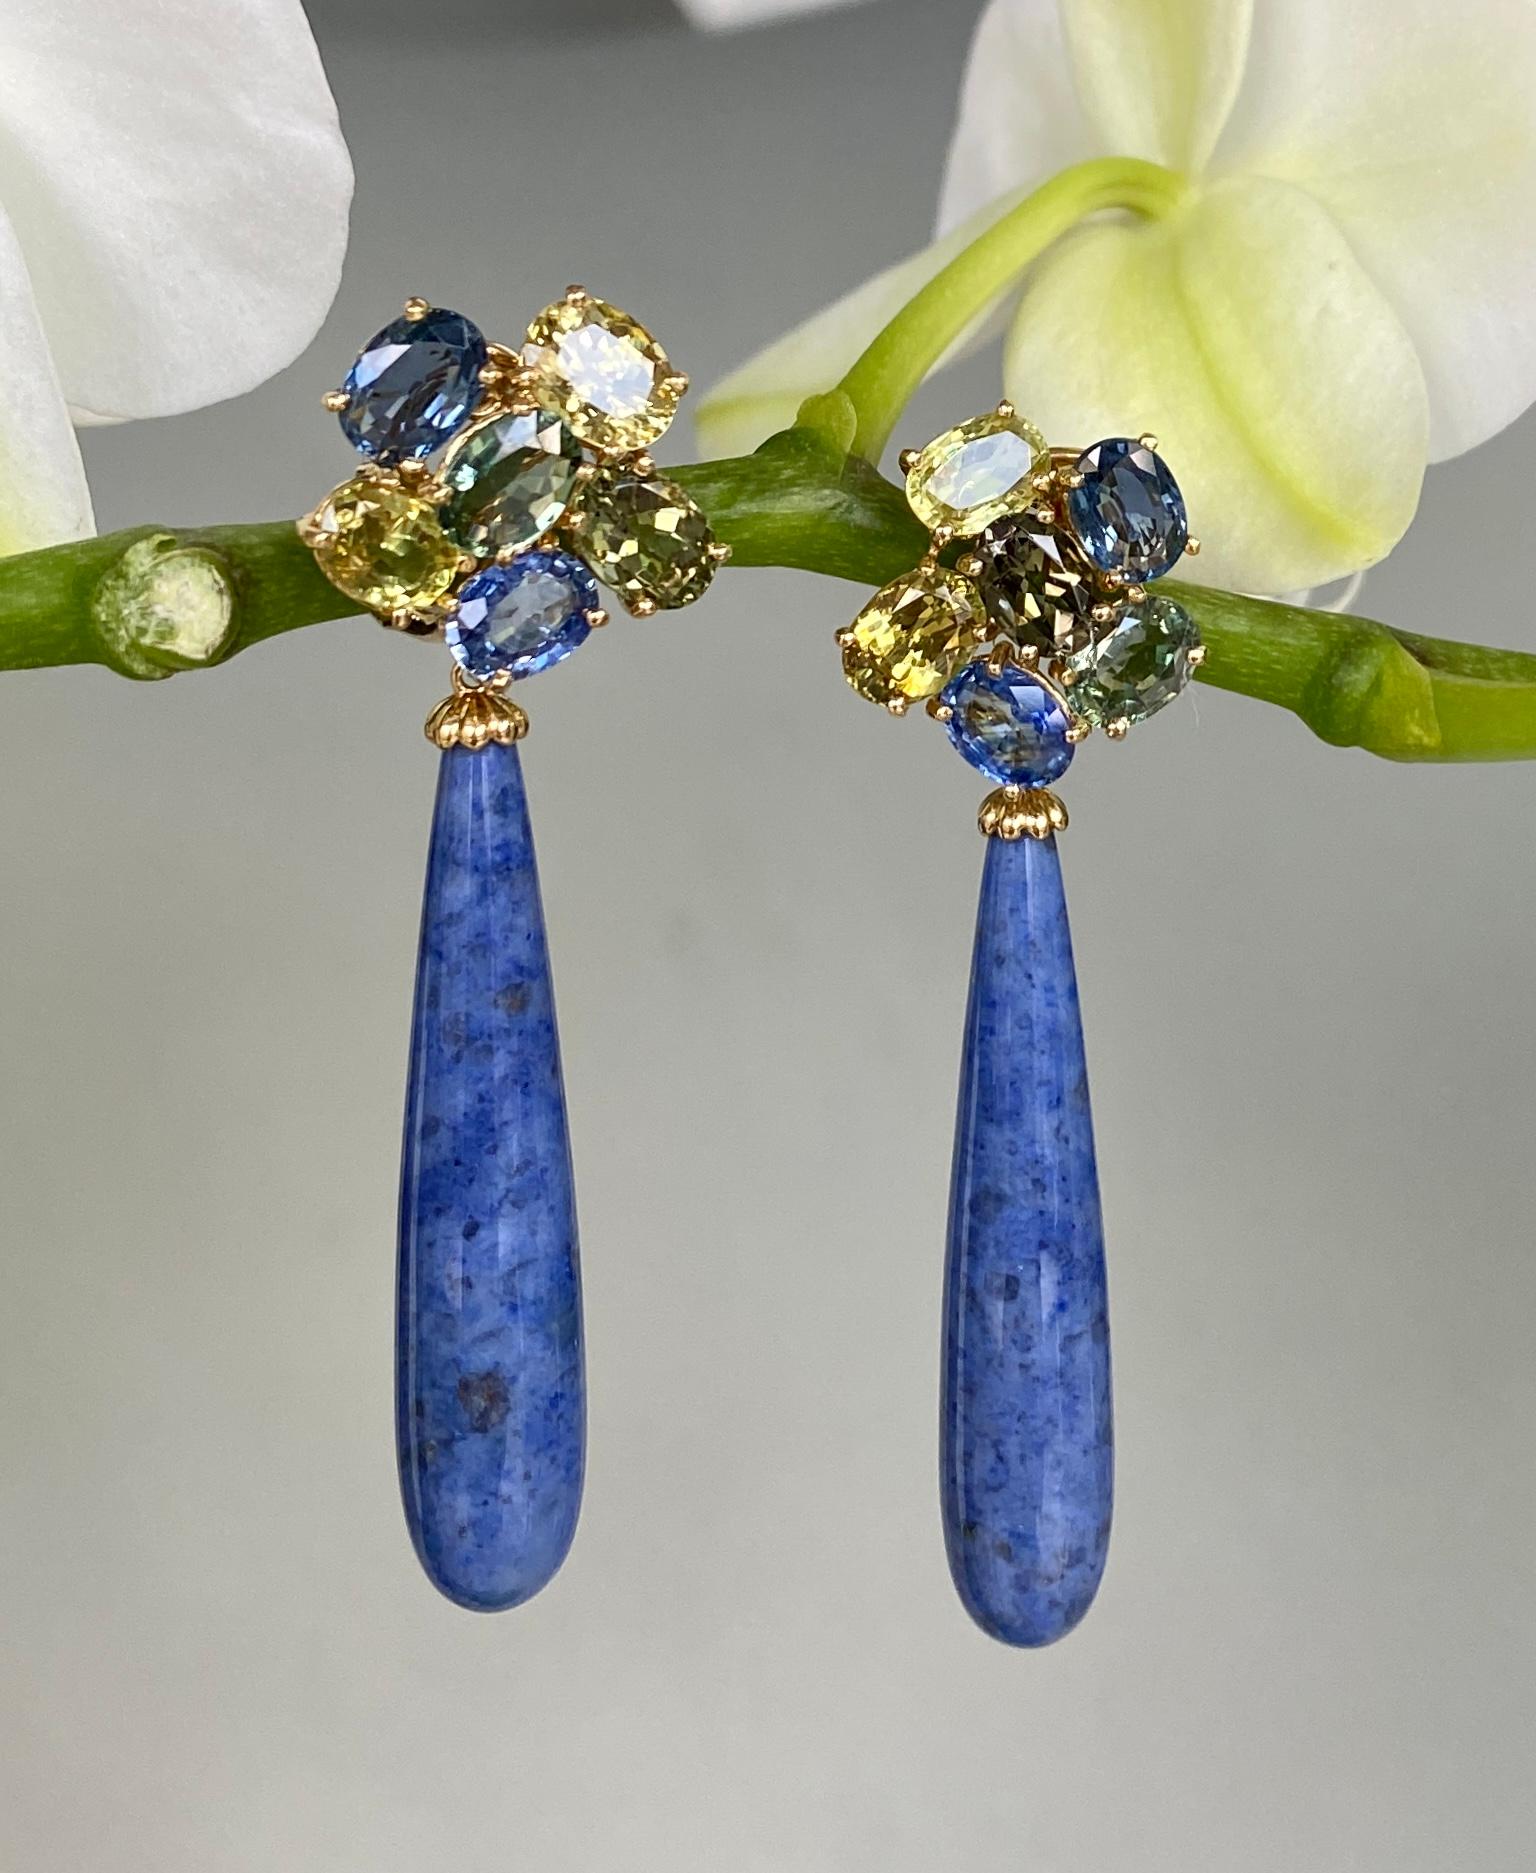 Earrings of blue and green sapphires and chrysoberyl cluster tops with blue dumortierite quartz cabochon drops, handcrafted in 18 Karat yellow gold.

These beautiful one-of-a-kind earrings of multicolored sapphire and chrysoberyl clusters with long